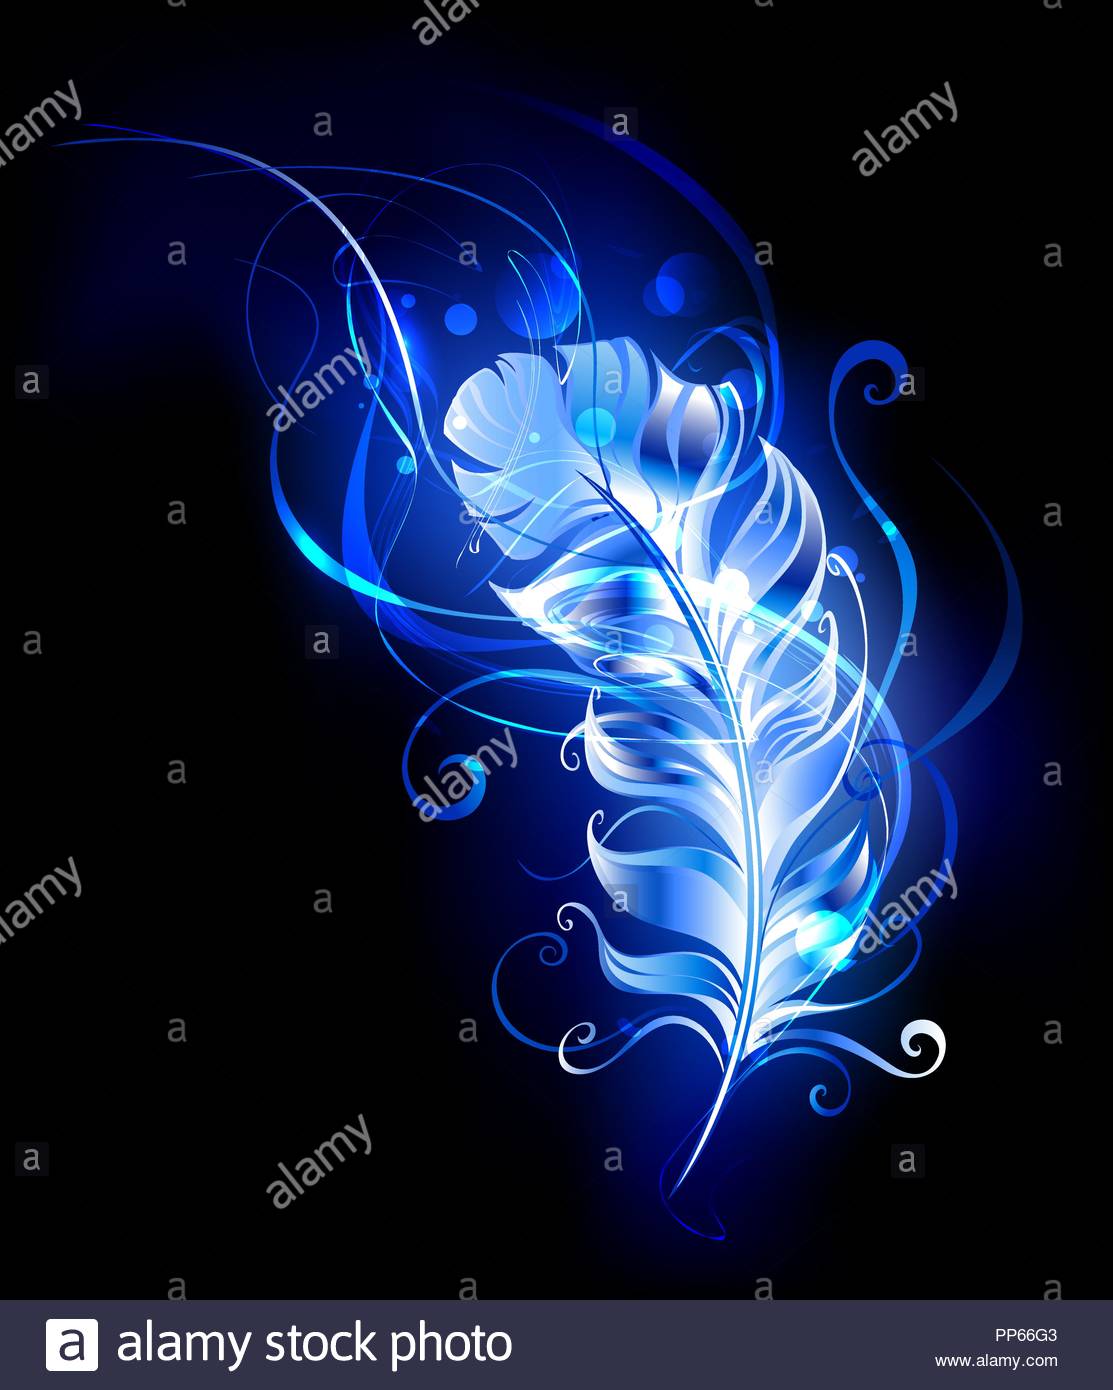 Fluffy Luminous Feather From Blue Flame On Black Background Stock